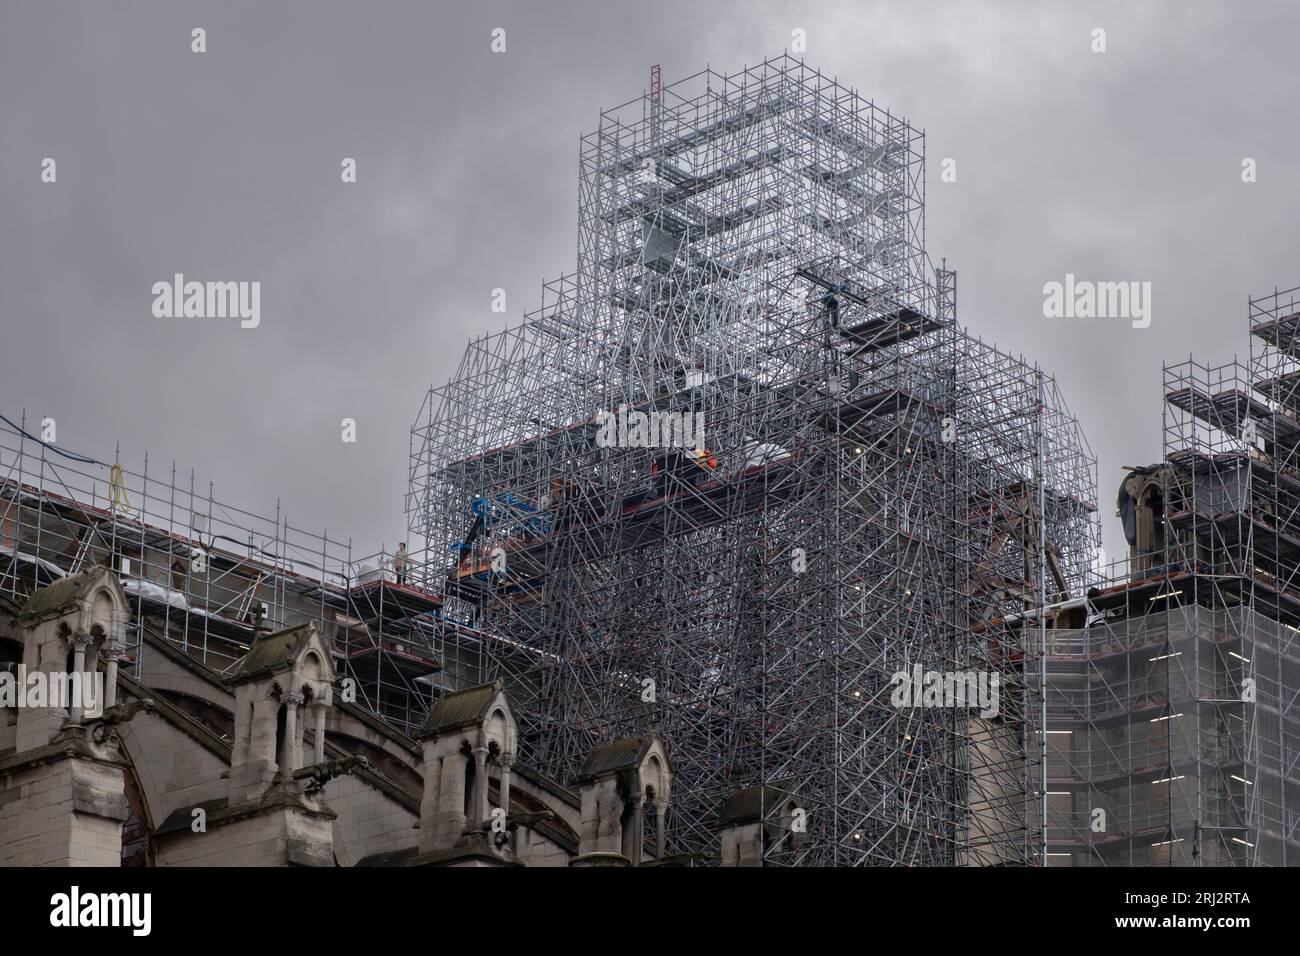 Notre Dame construction site. Four years after the cathedral burnt down, the restoration work has come a long way. Stock Photo